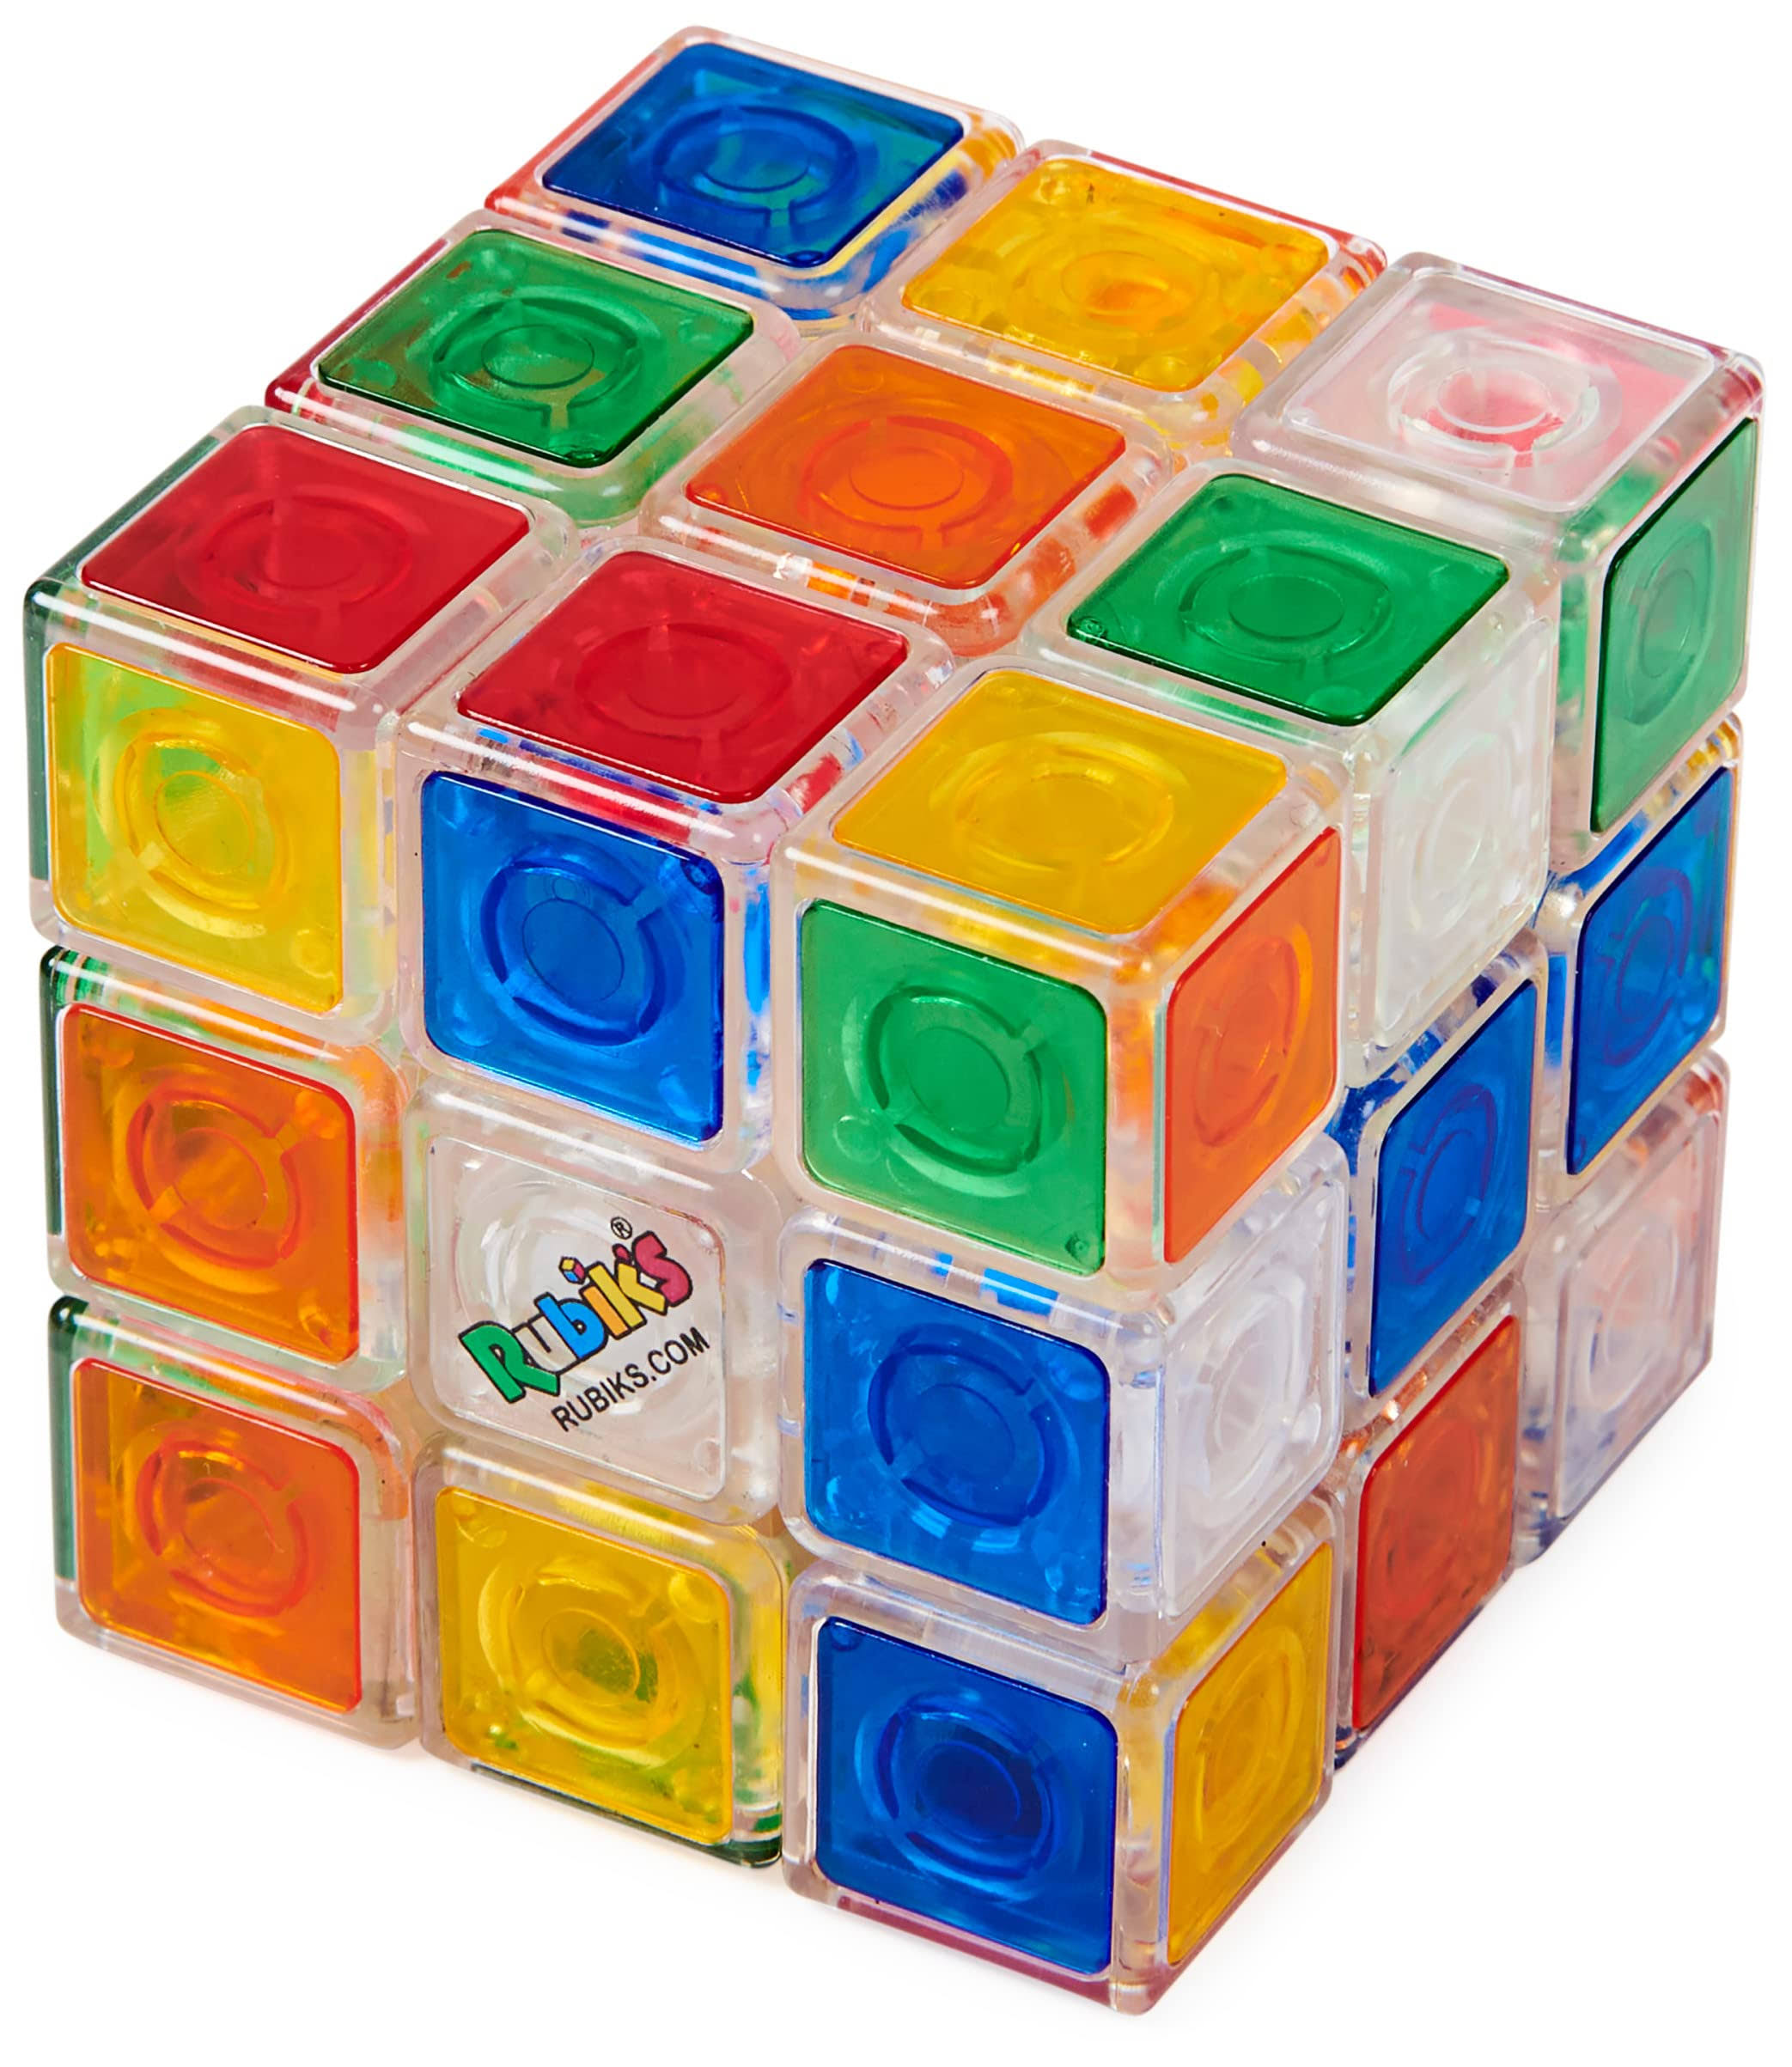 Rubik’s Crystal, New Transparent 3x3 Cube Classic Color-matching Problem-solving Brain Teaser Puzzle Game Toy, For Kids and Adults Aged 8 and Up